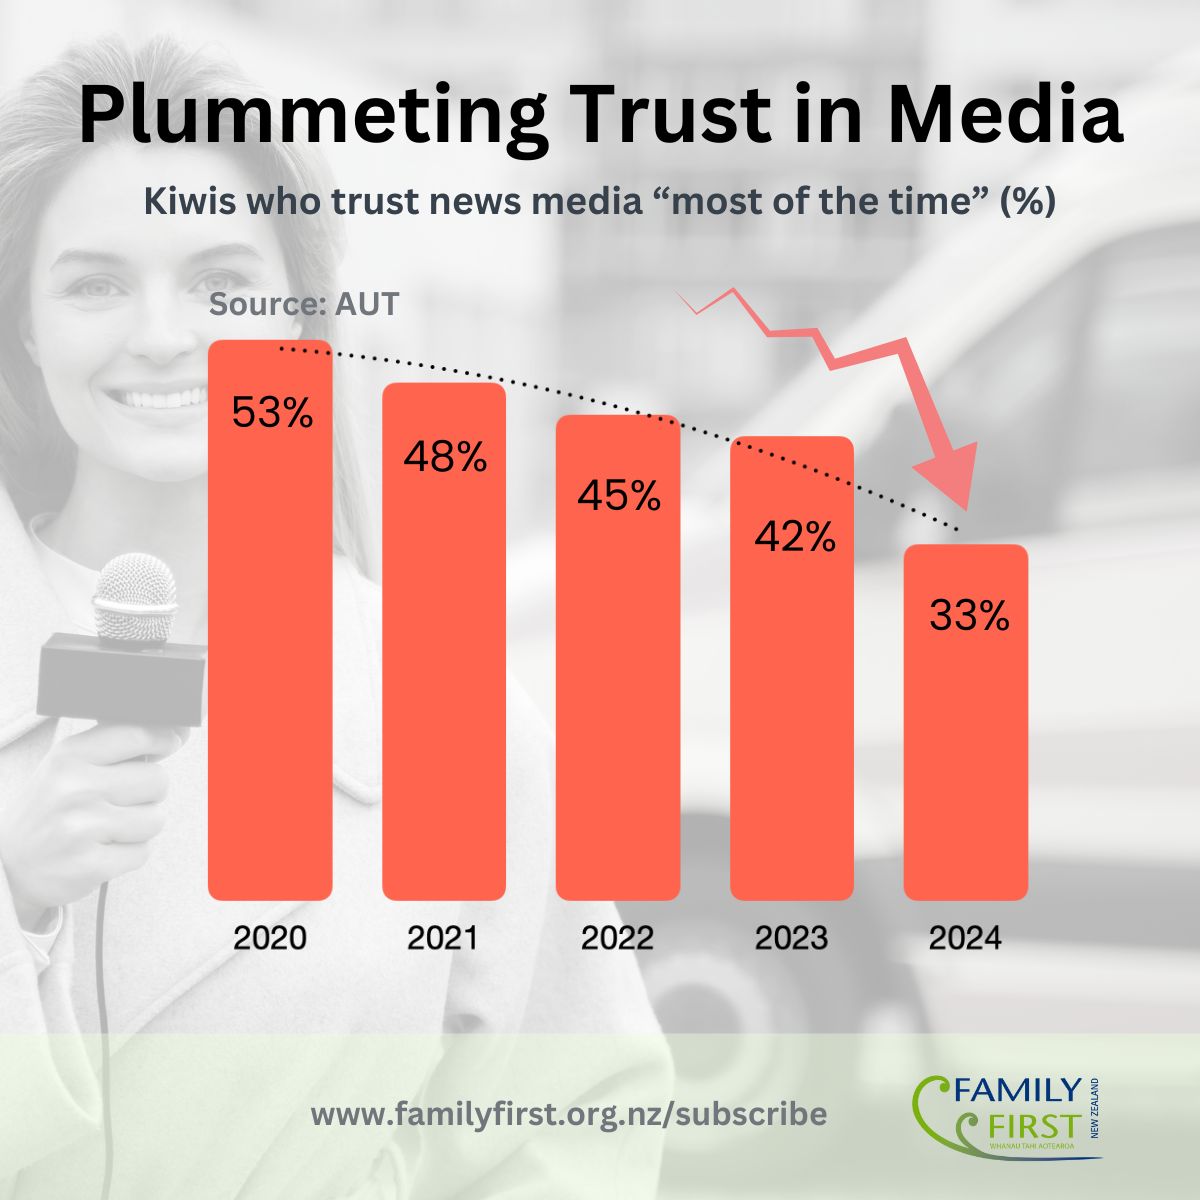 AUT's latest 'Trust in News in Aotearoa New Zealand' Study shows that a mere 33% of Kiwis trust our media - placing it amongst the least trusted media in the world.

Is this a terminal decline?

#media #familyfirstnz #familyfirst